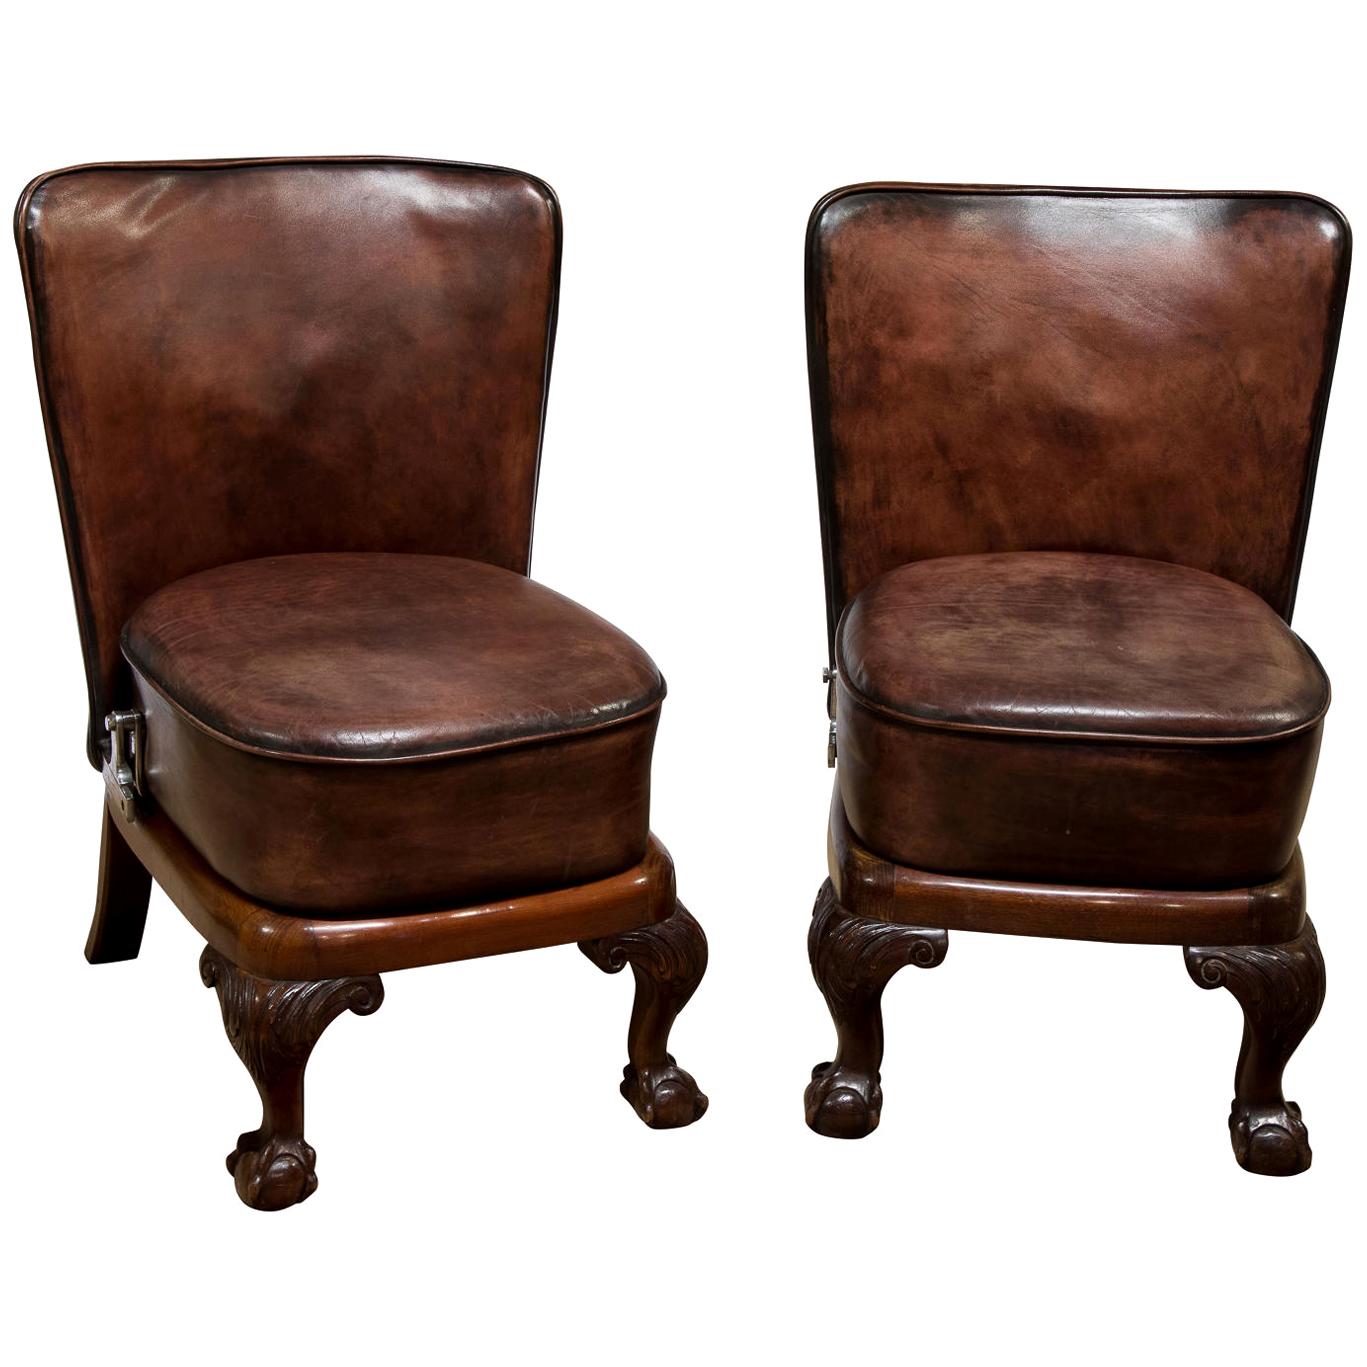 Pair of Unusual Mahogany Framed Leather Seats For Sale